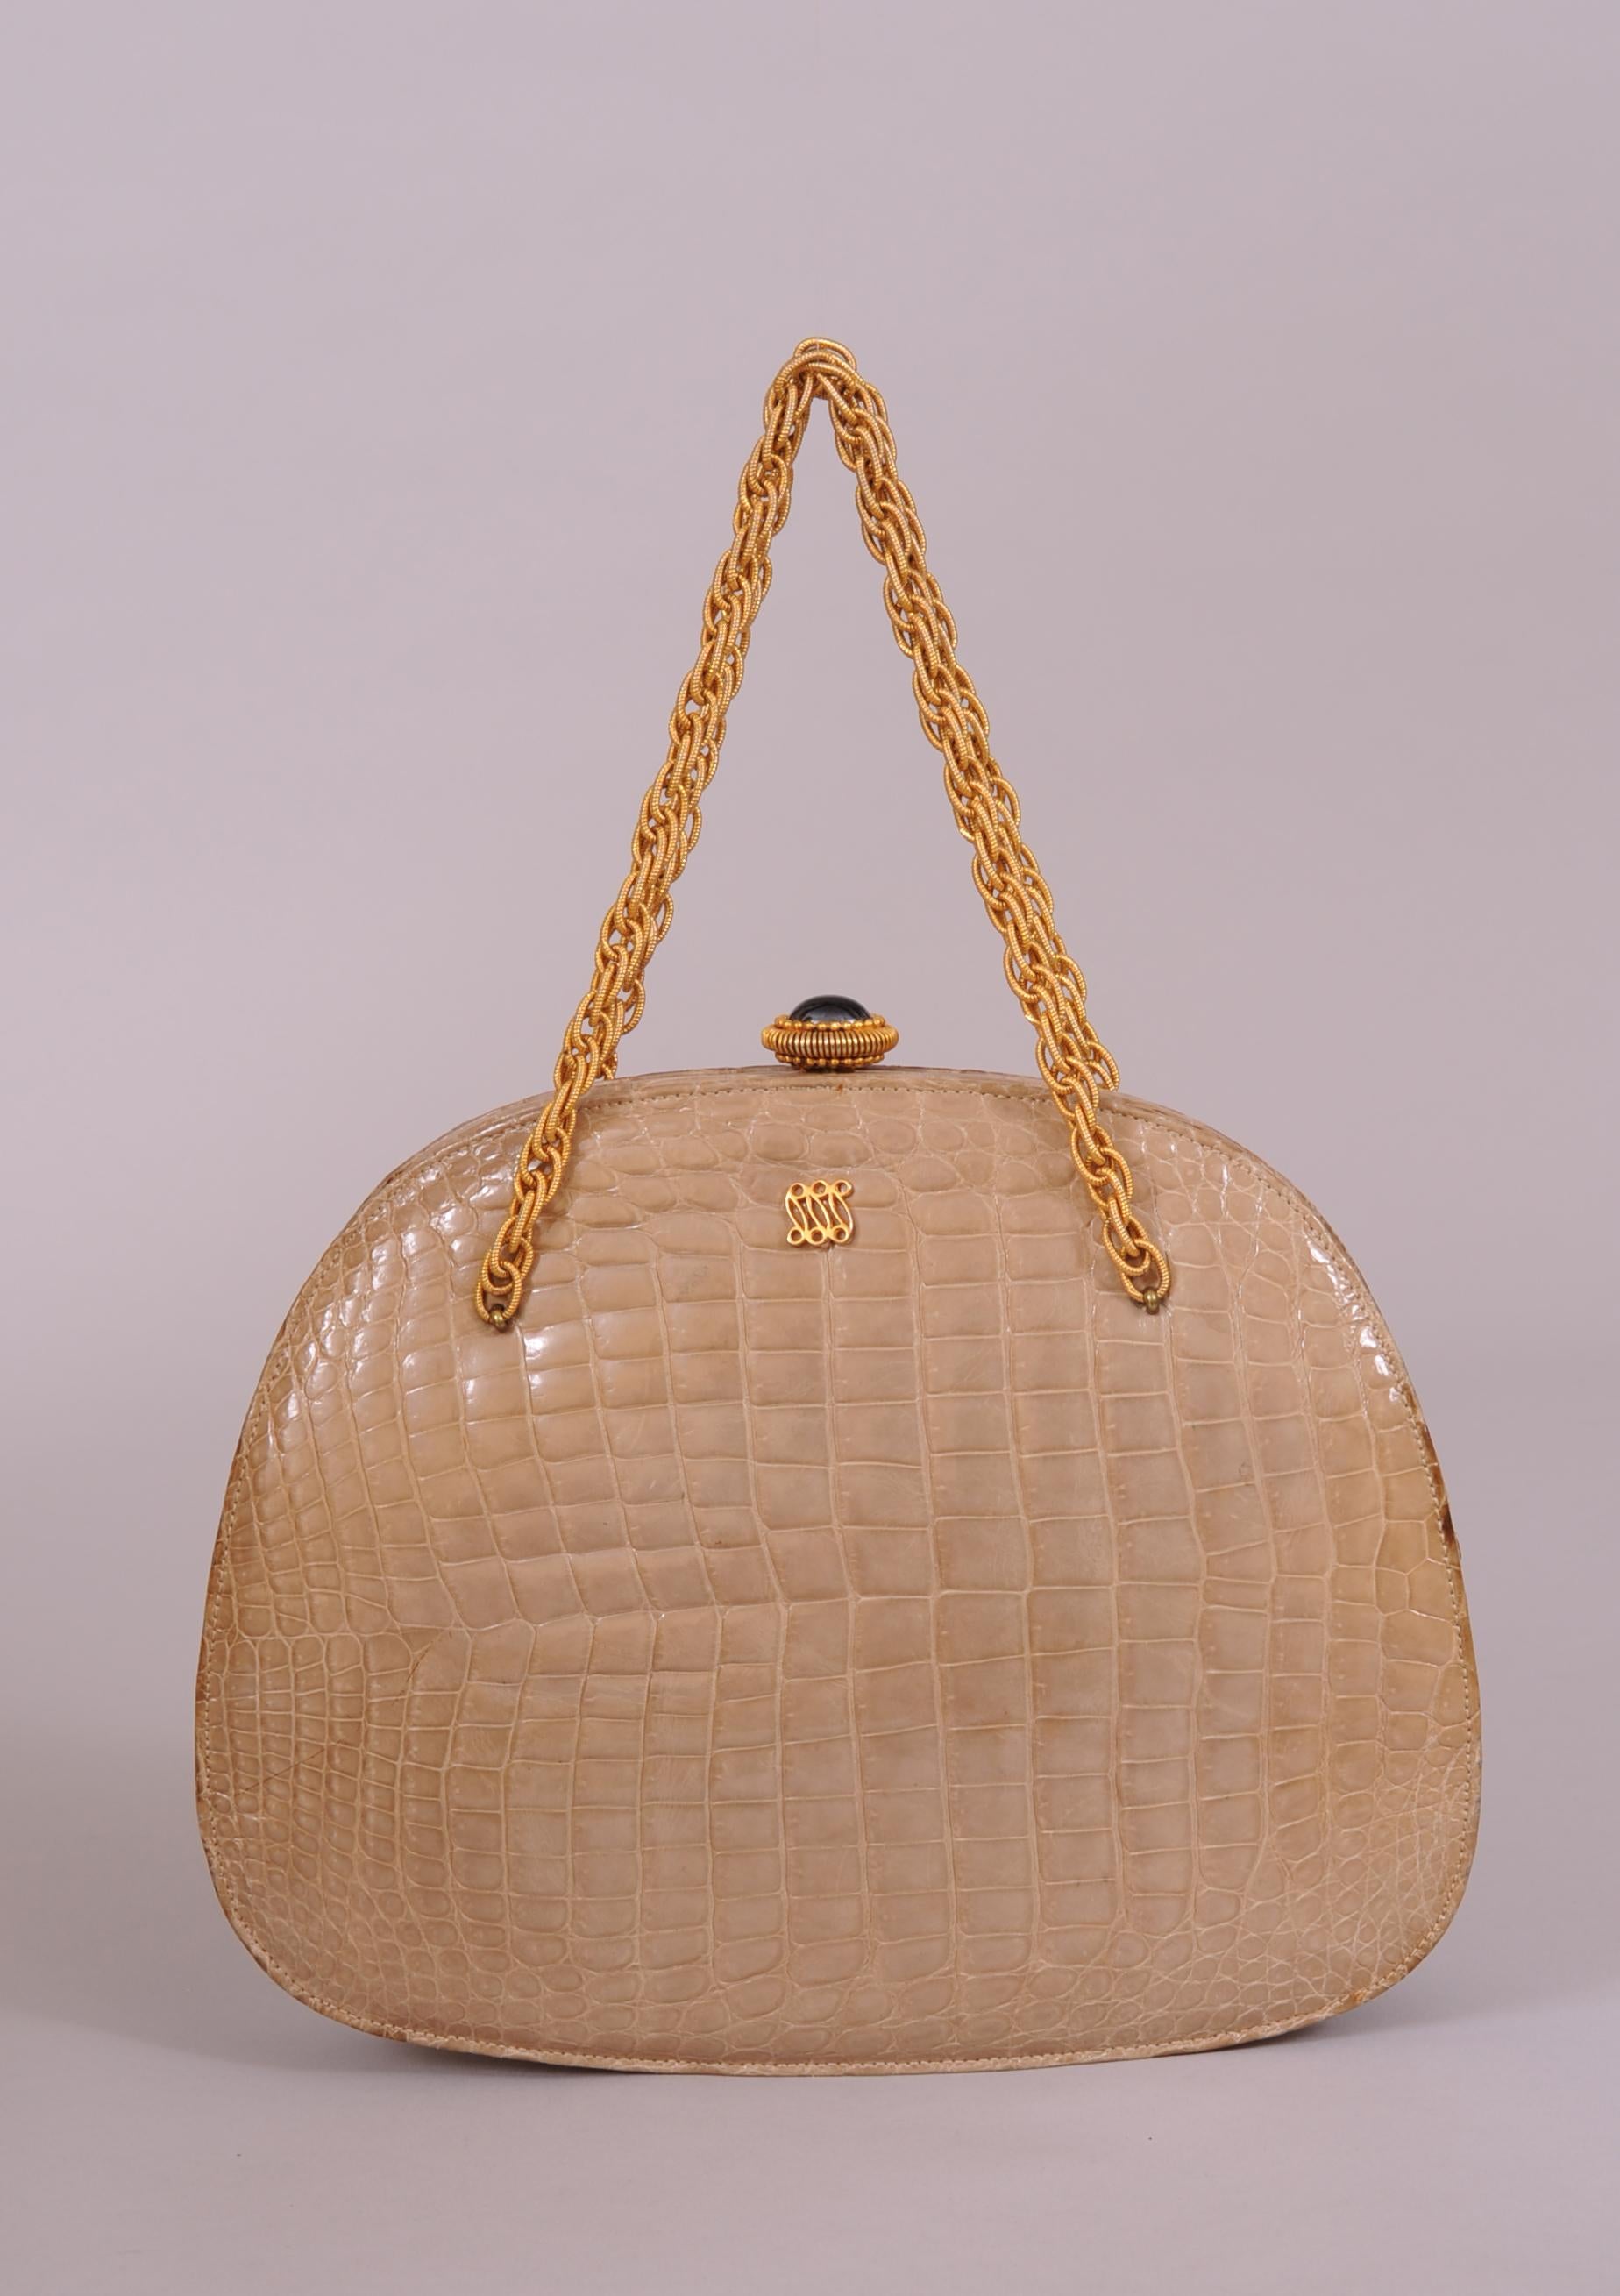 A great pale beige crocodile bag from Lucille de Paris is embellished with a large cabochon clasp and gold toned chain straps. The interior is natural leather with the Lucille name and logo and Made in USA stamped in gold. There is one zippered